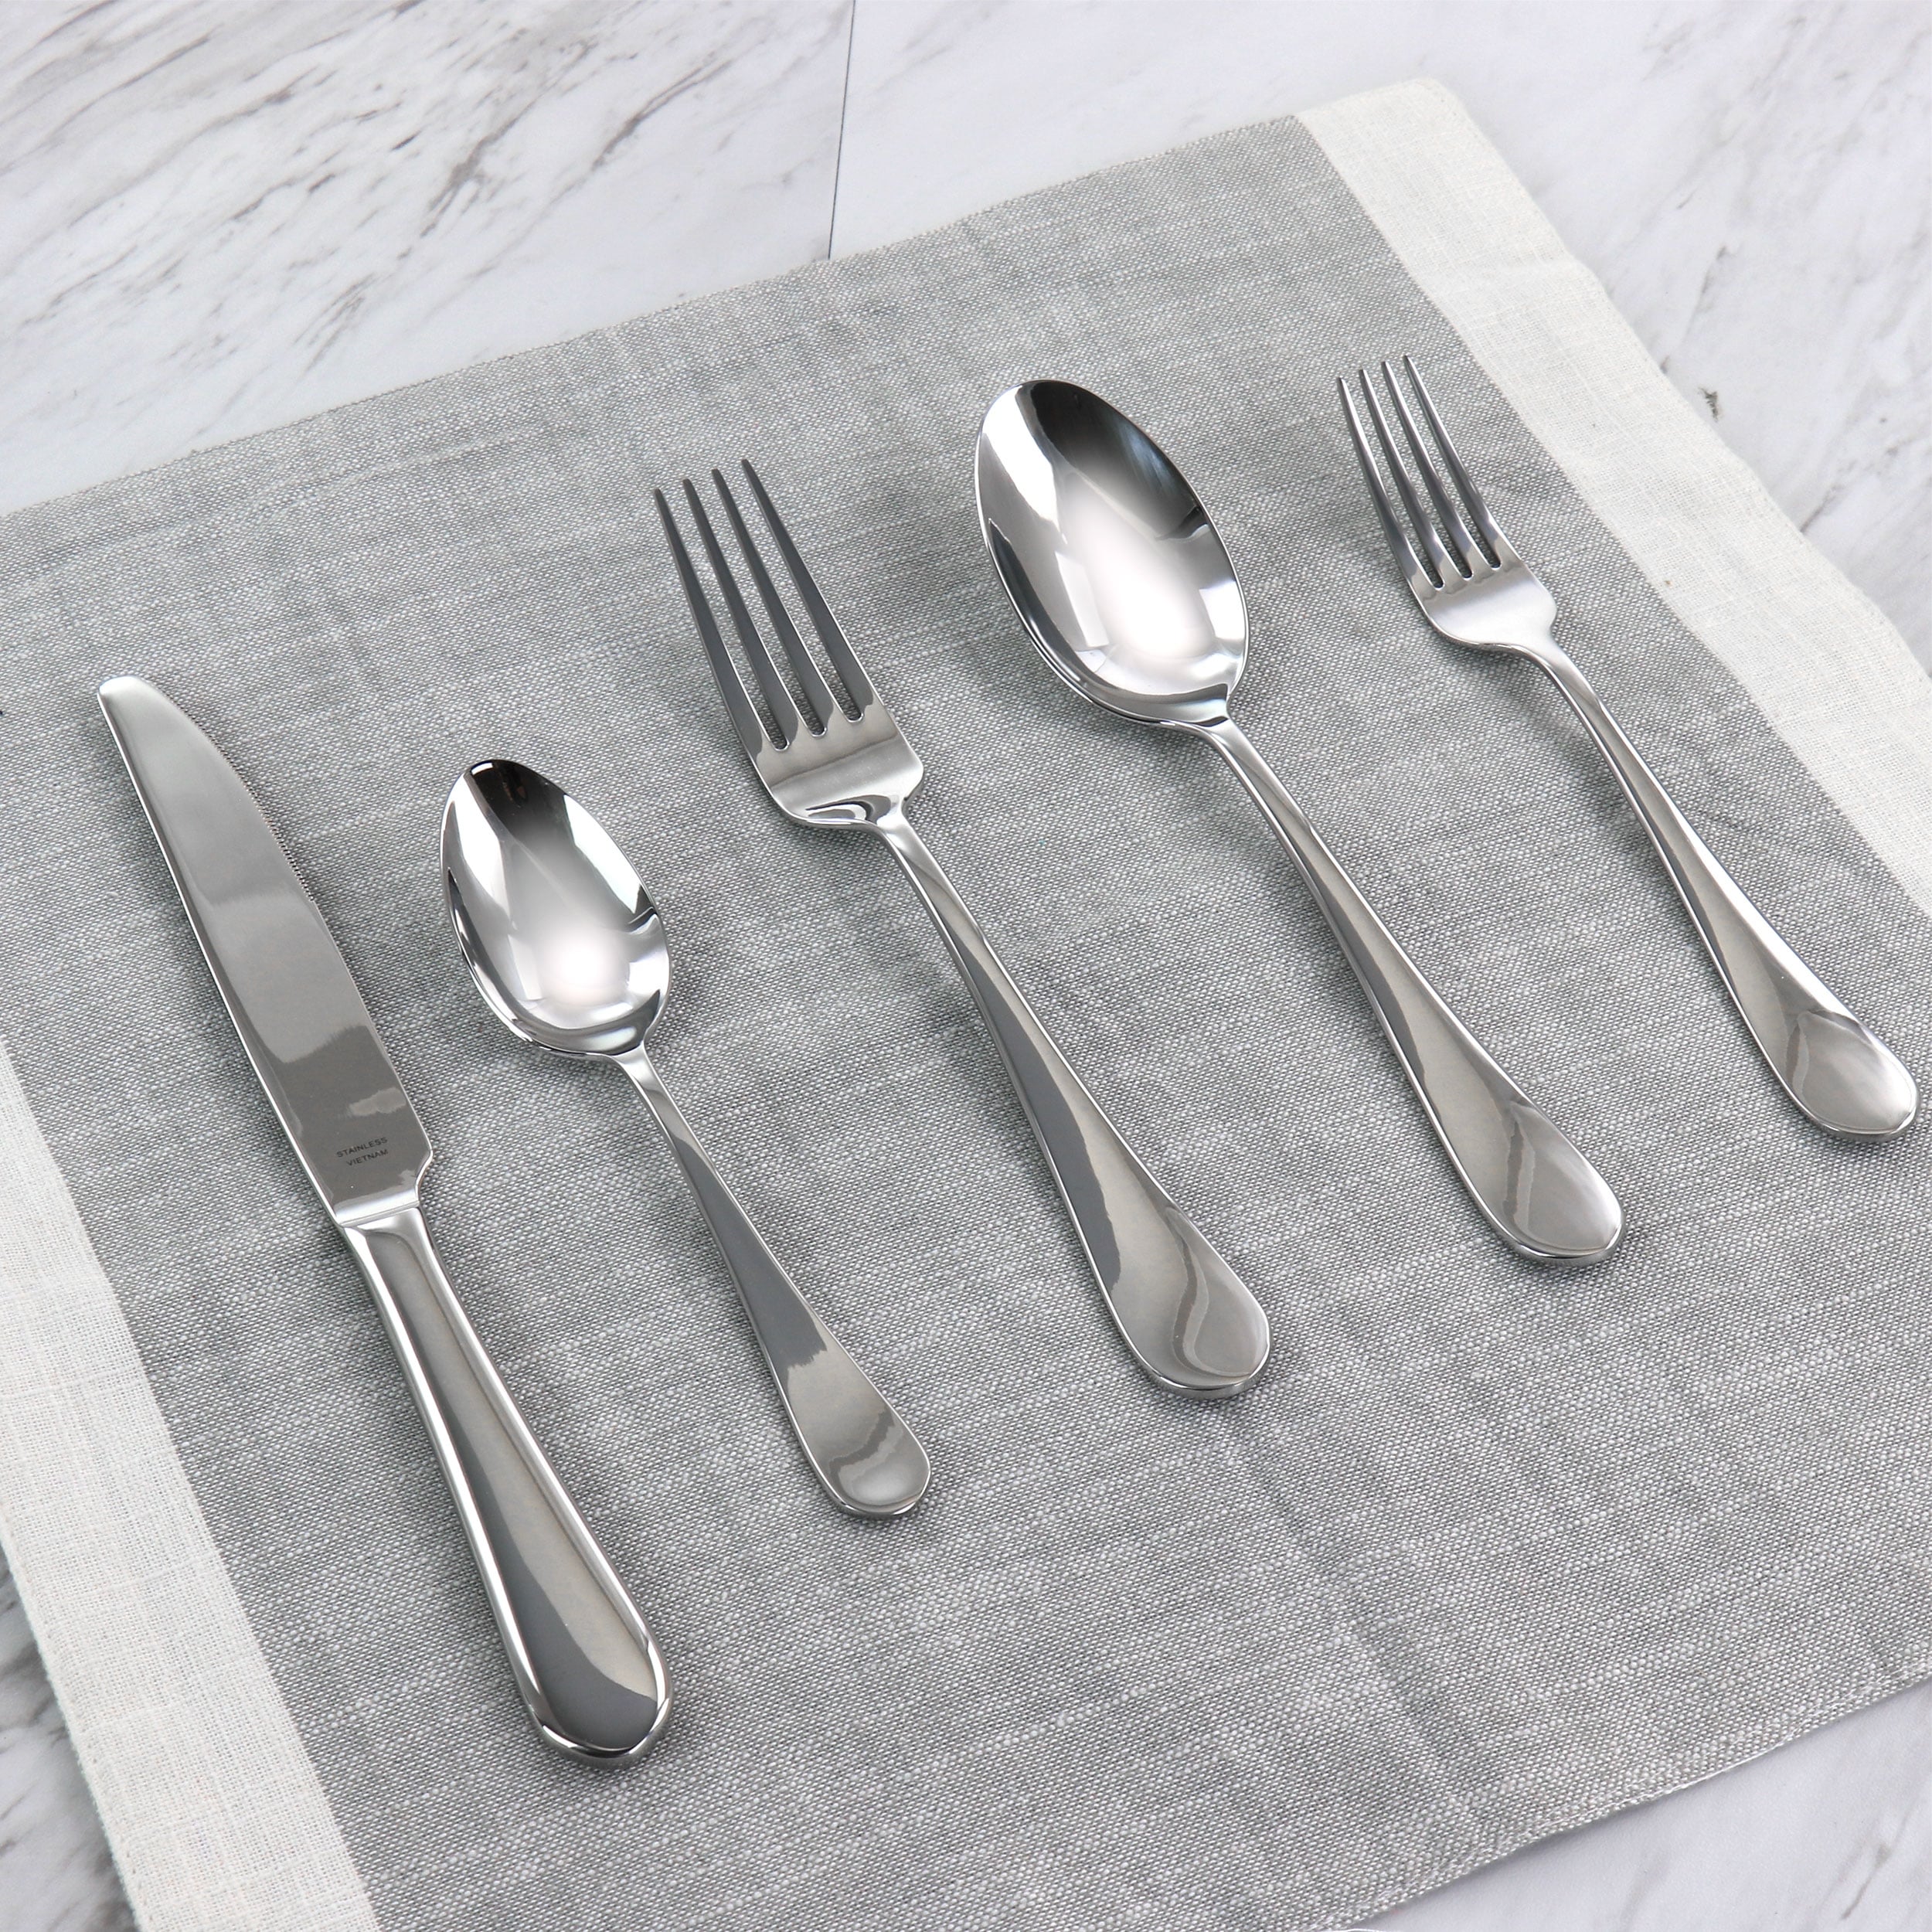 Babish 20-Piece Stainless Steel Flatware Set – The Cutlery Review